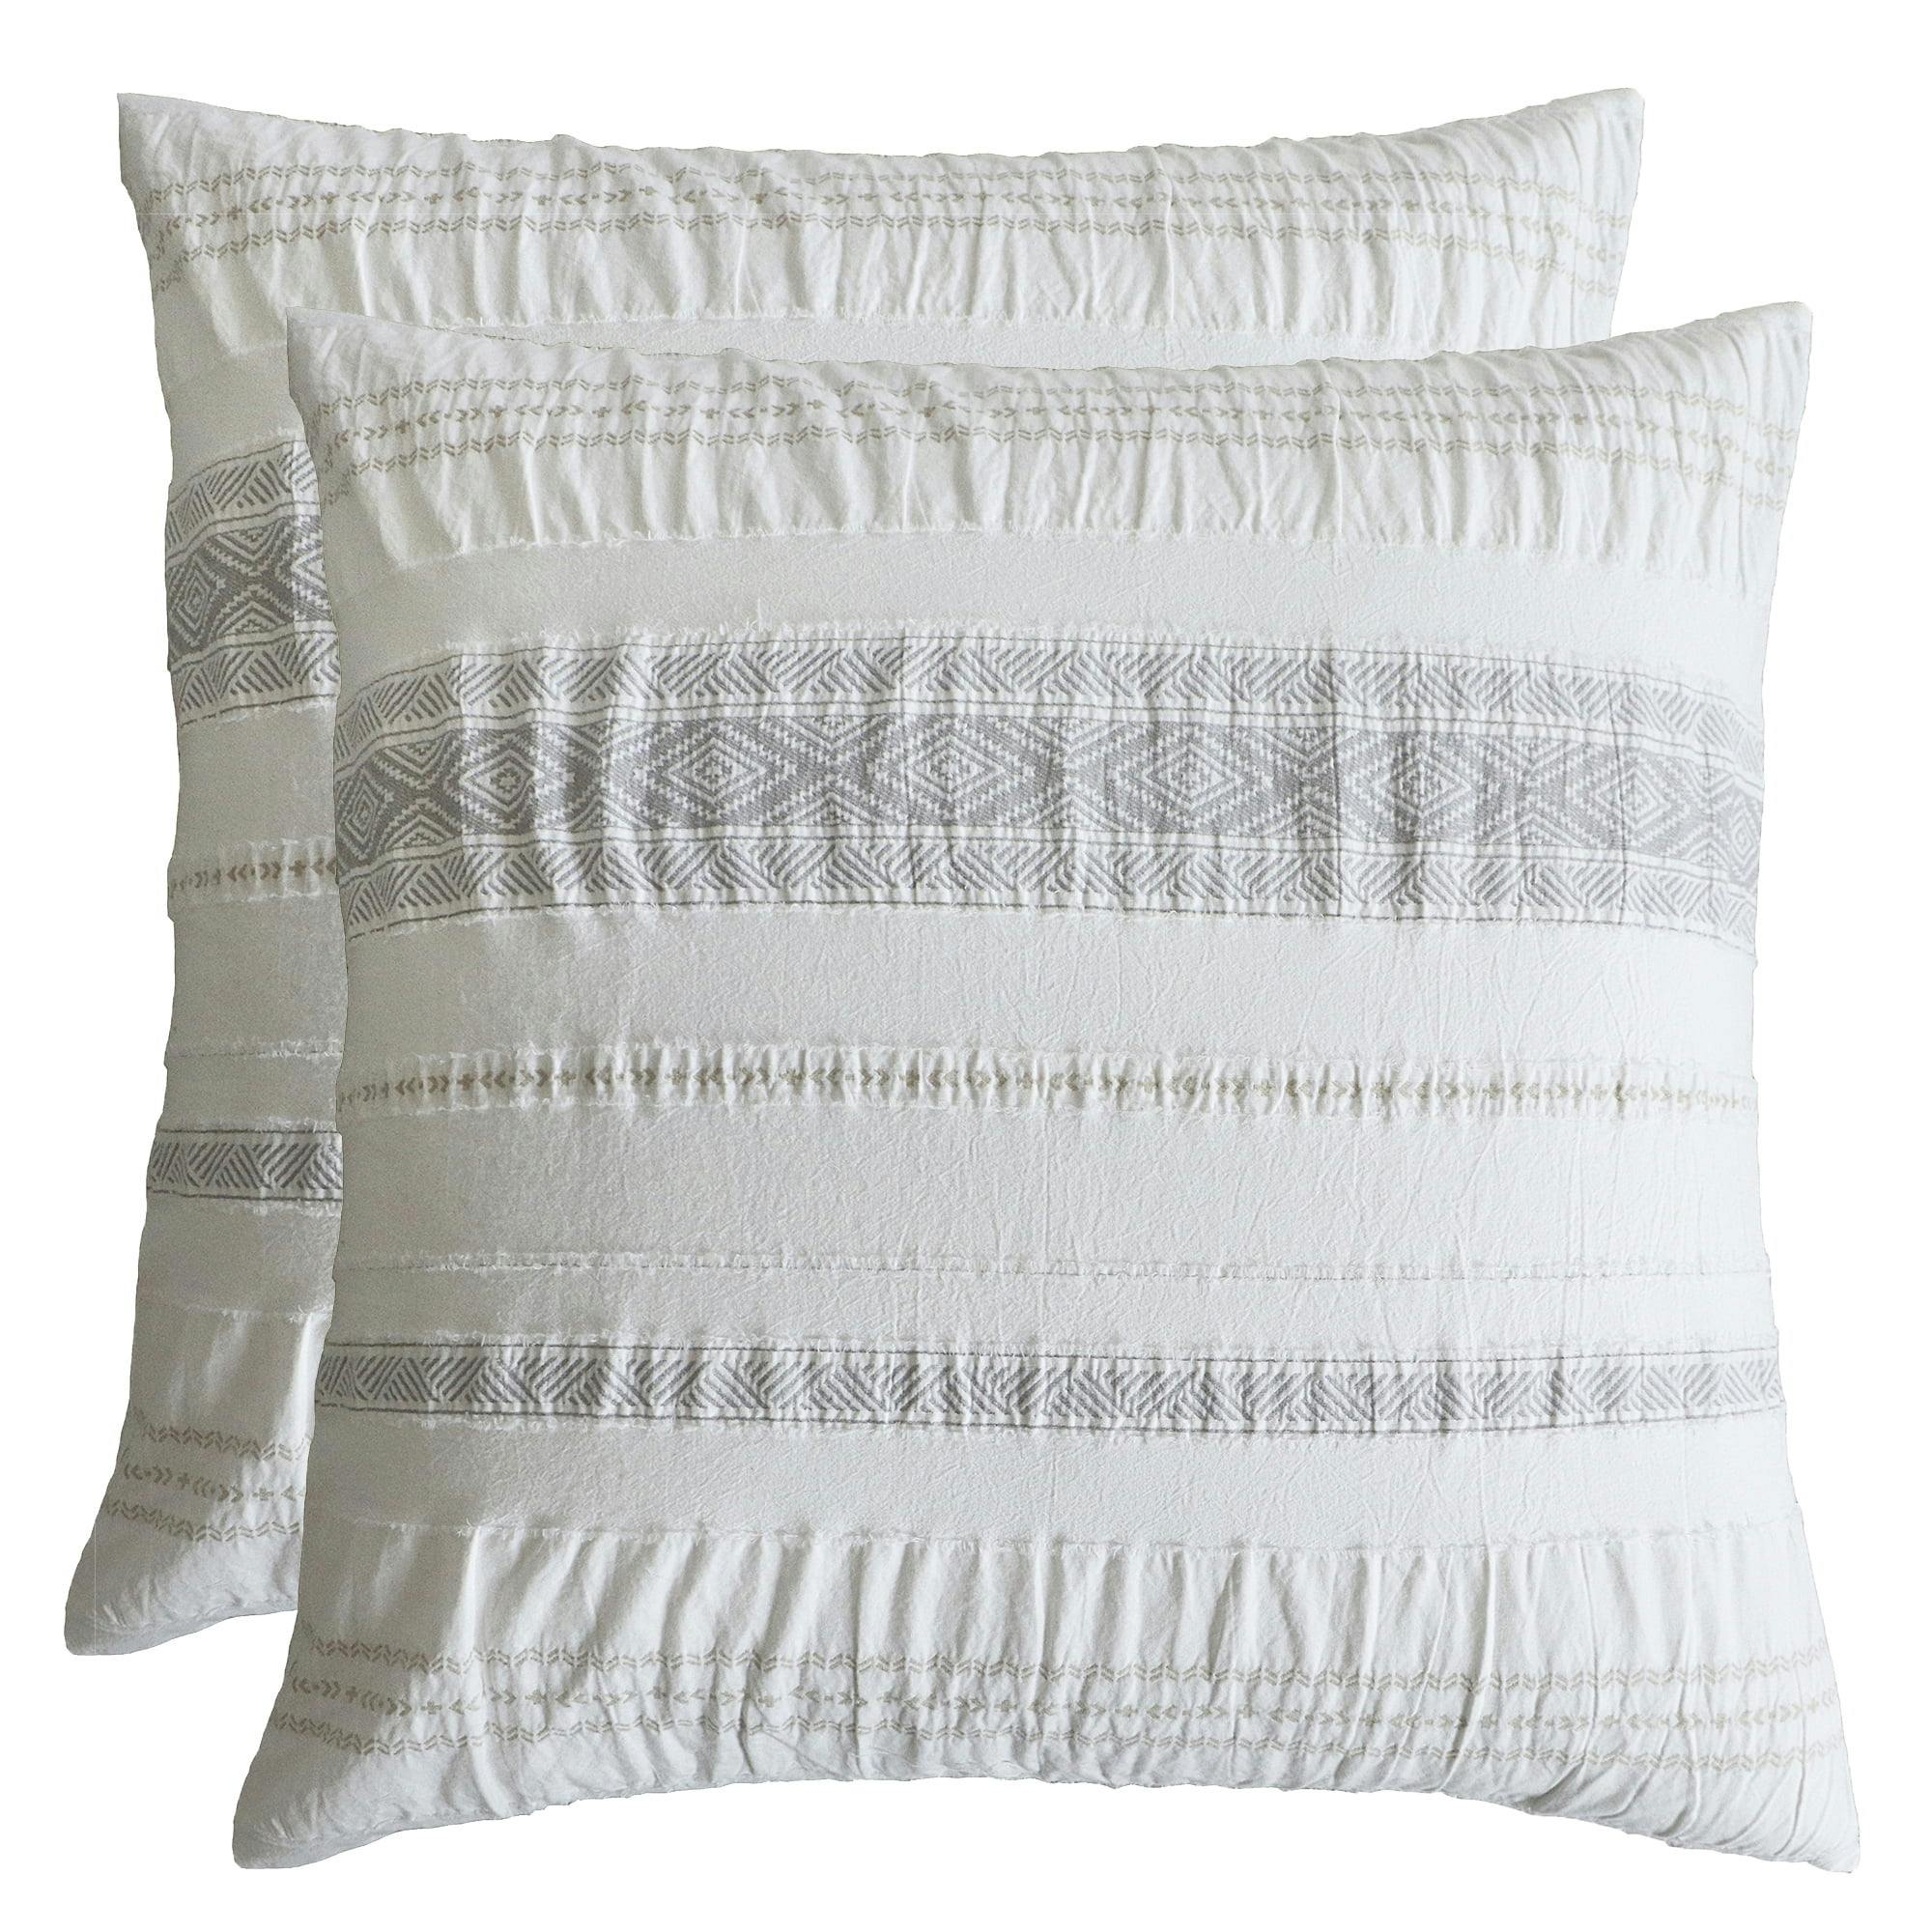 Bohemian Jacquard Euro Sham Set in Gray, Taupe, and Off-White - 26x26